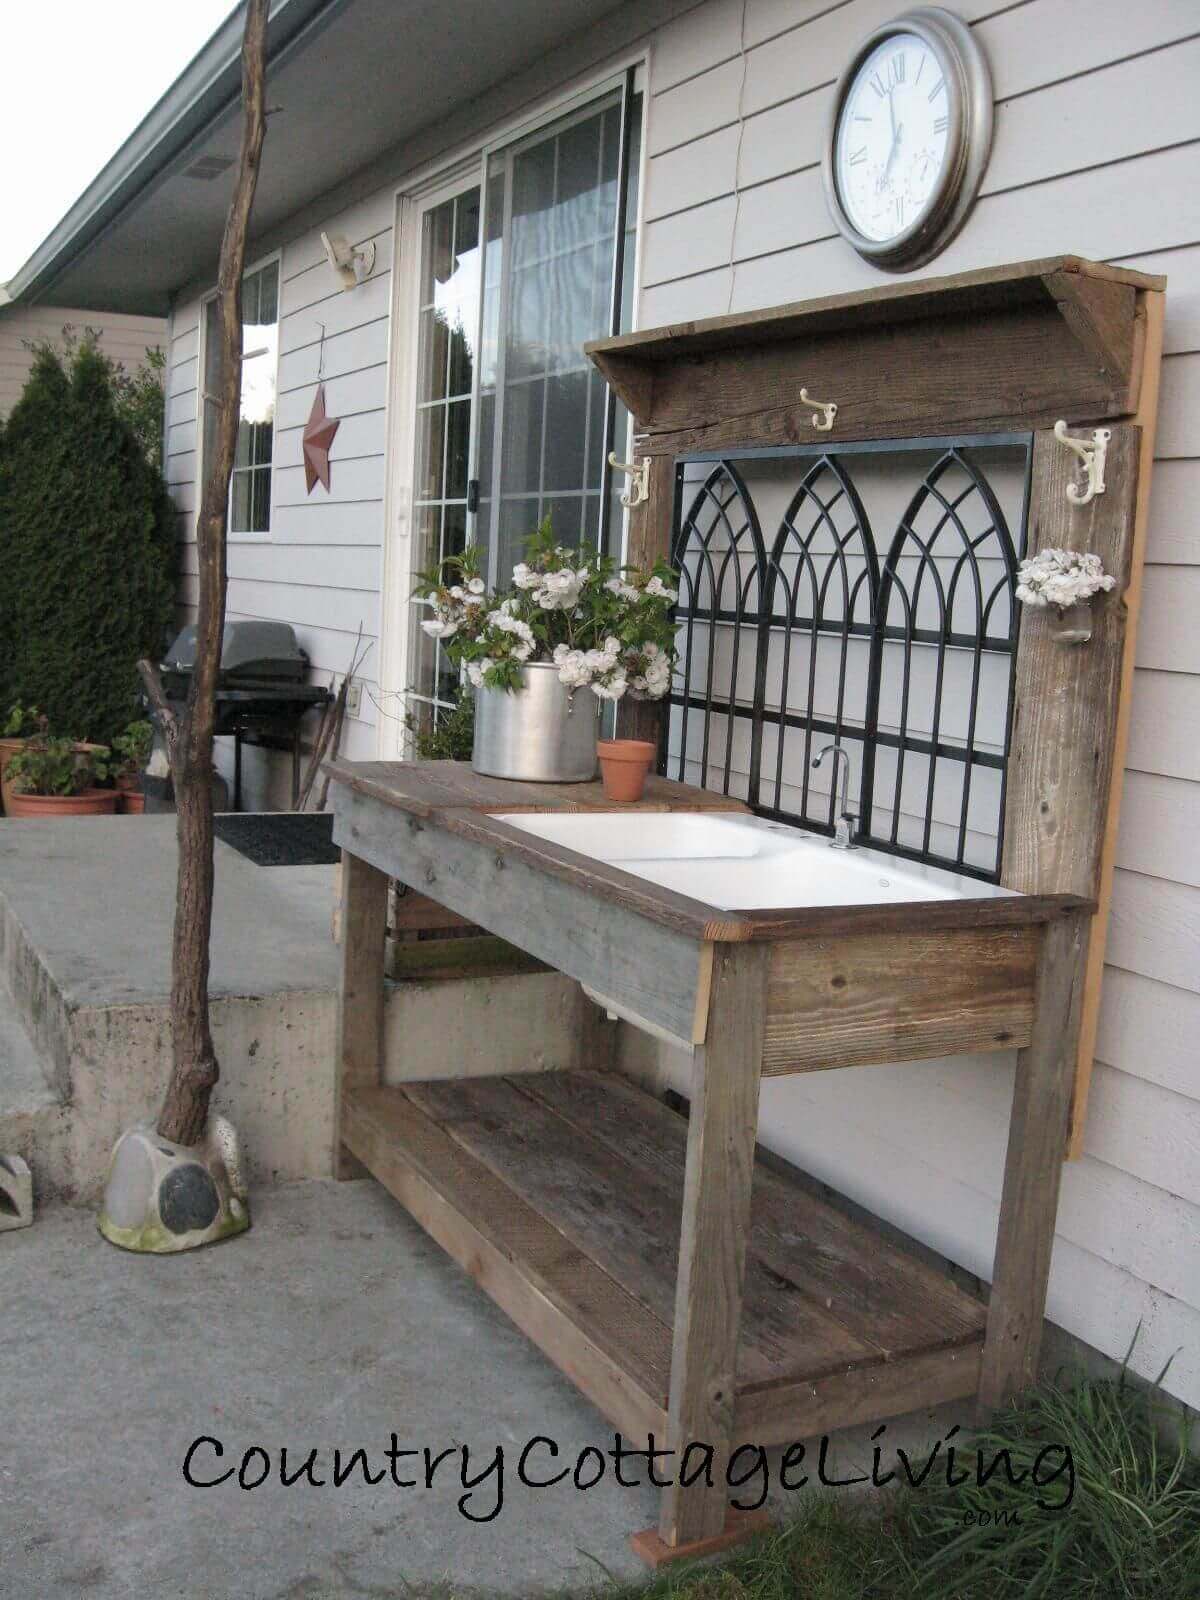  Architectural Salvage Potting Bench Idea